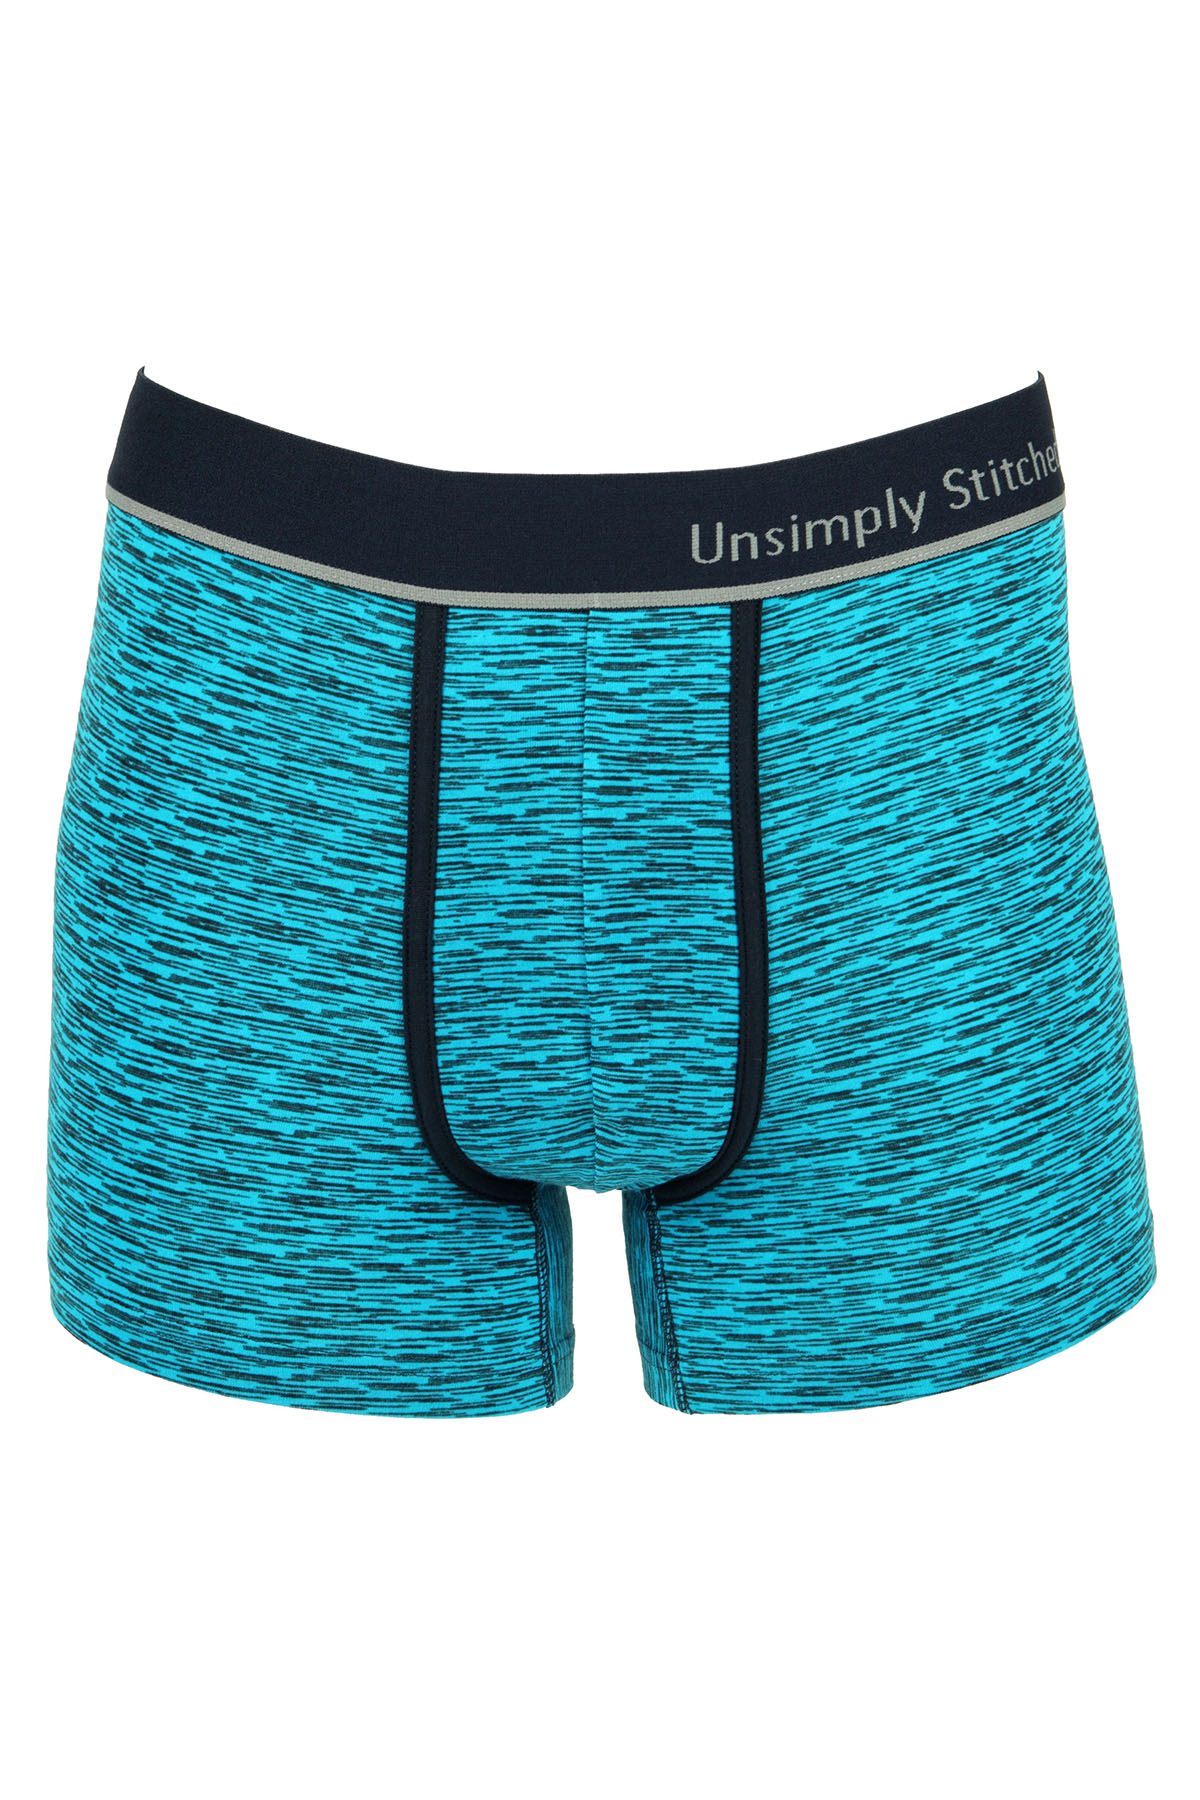 Unsimply Stitched Blue Melange Trunk